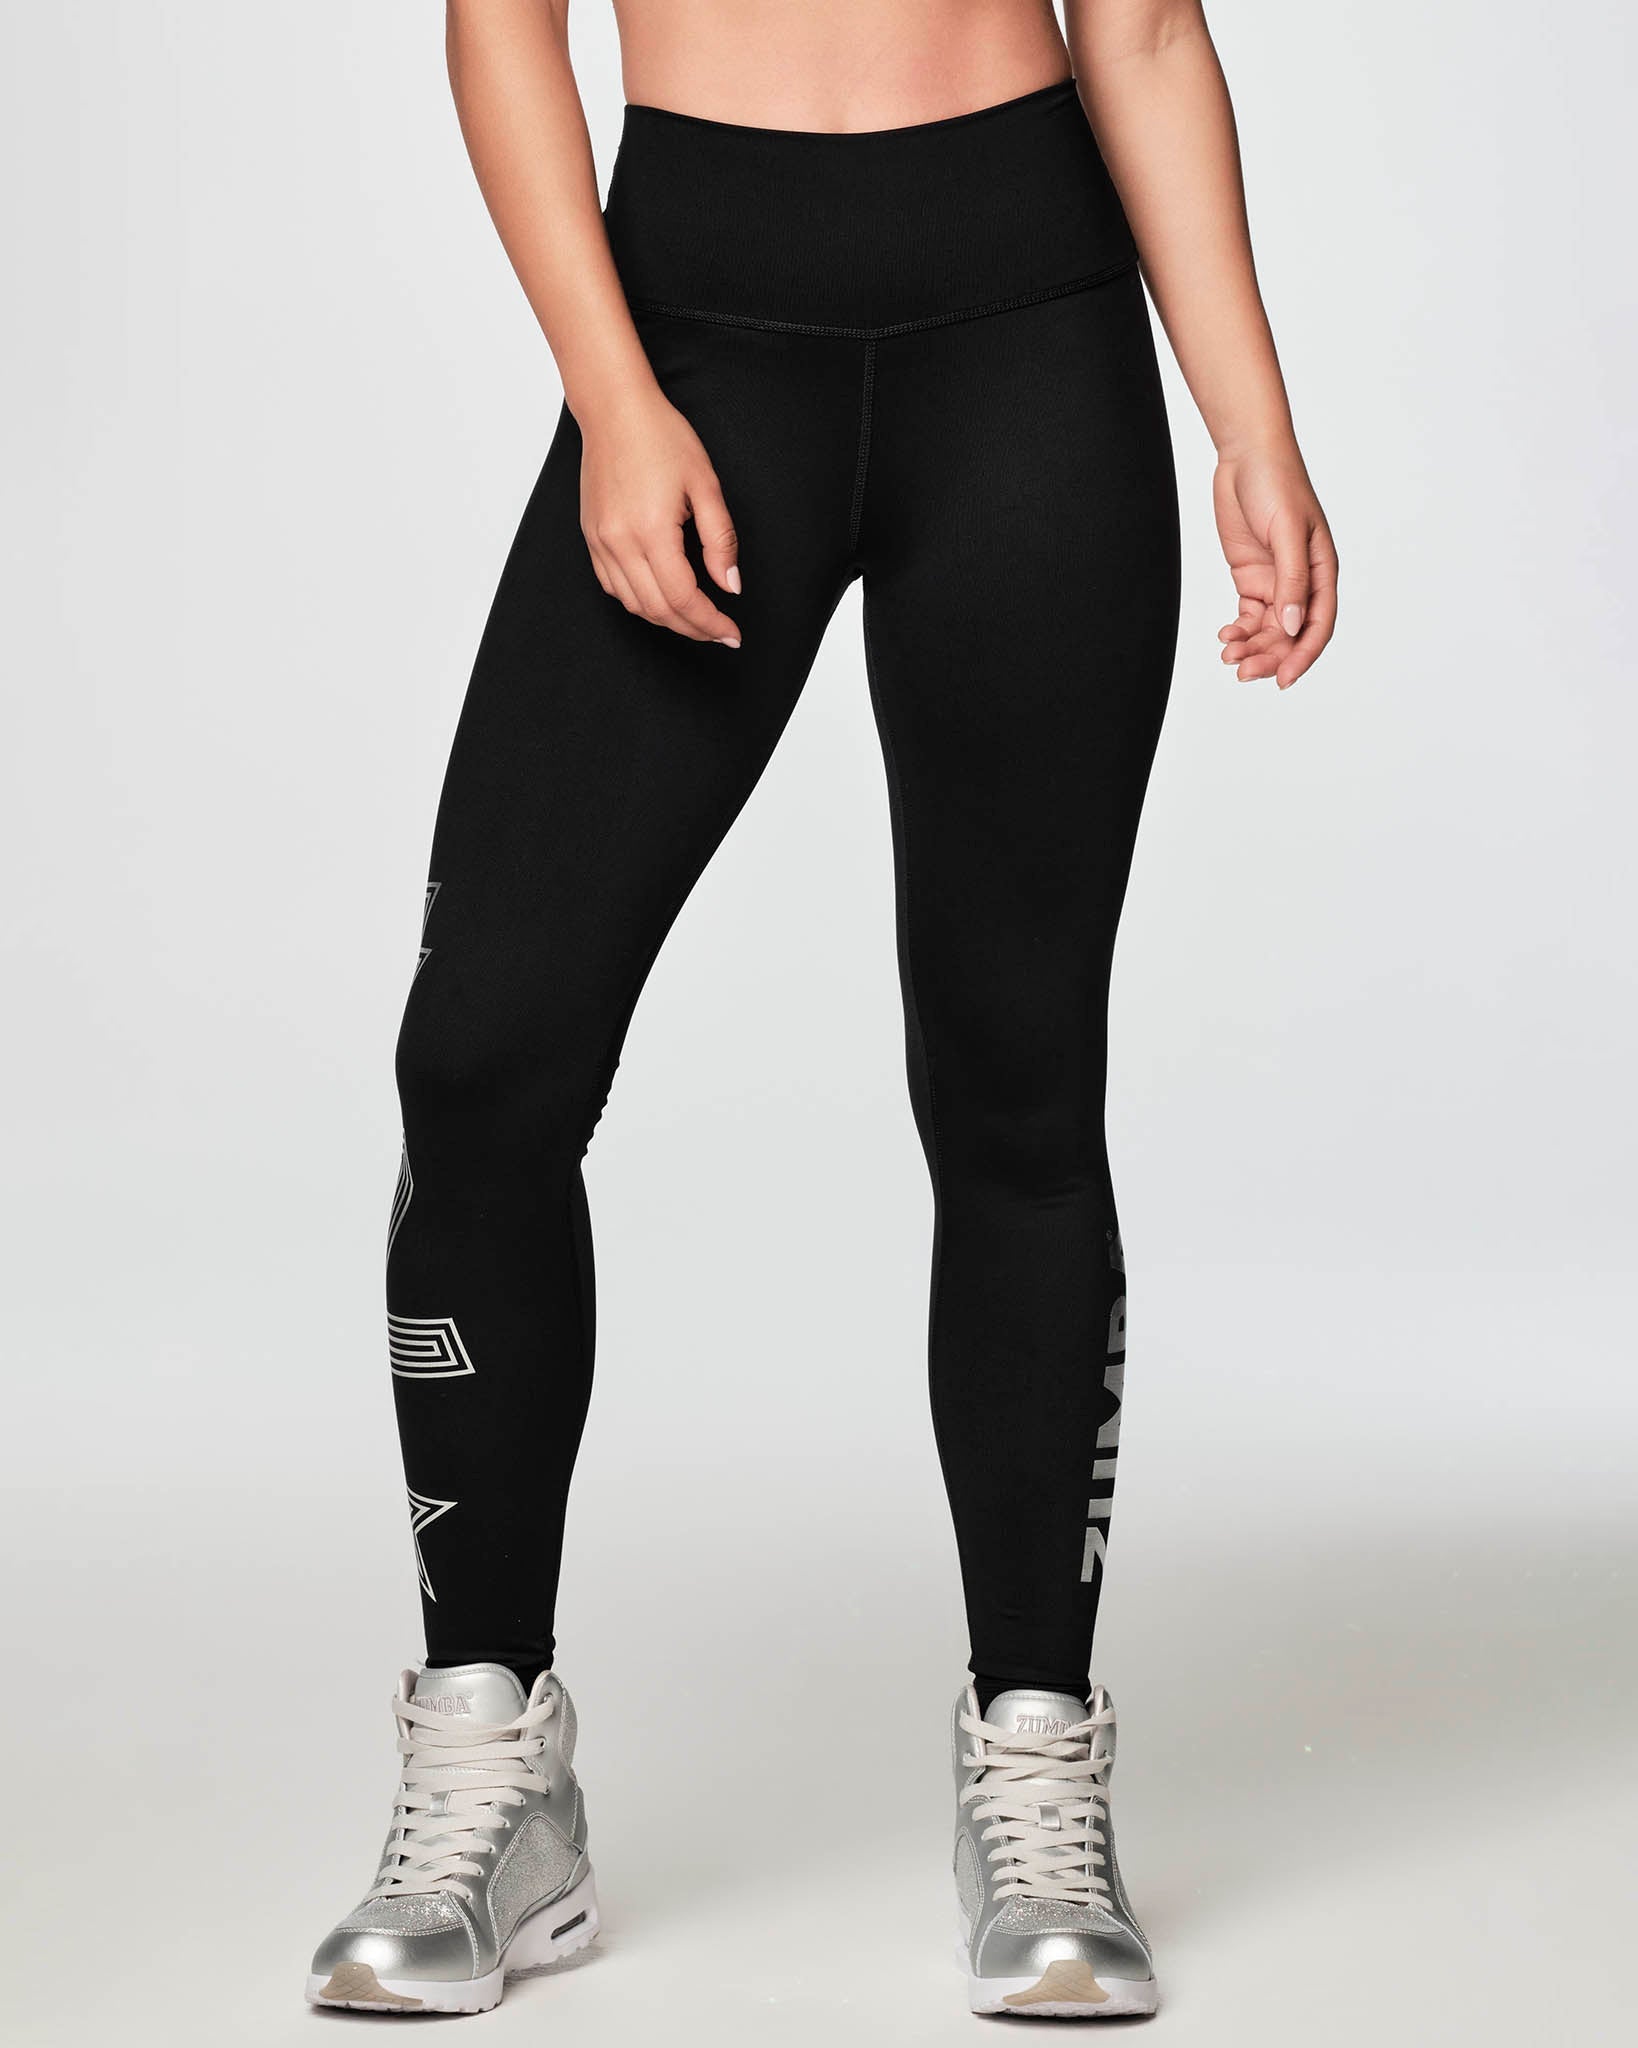 Sport leggings for Women Kappa Fitness Cipaxy Black – Moon Behind The Hill